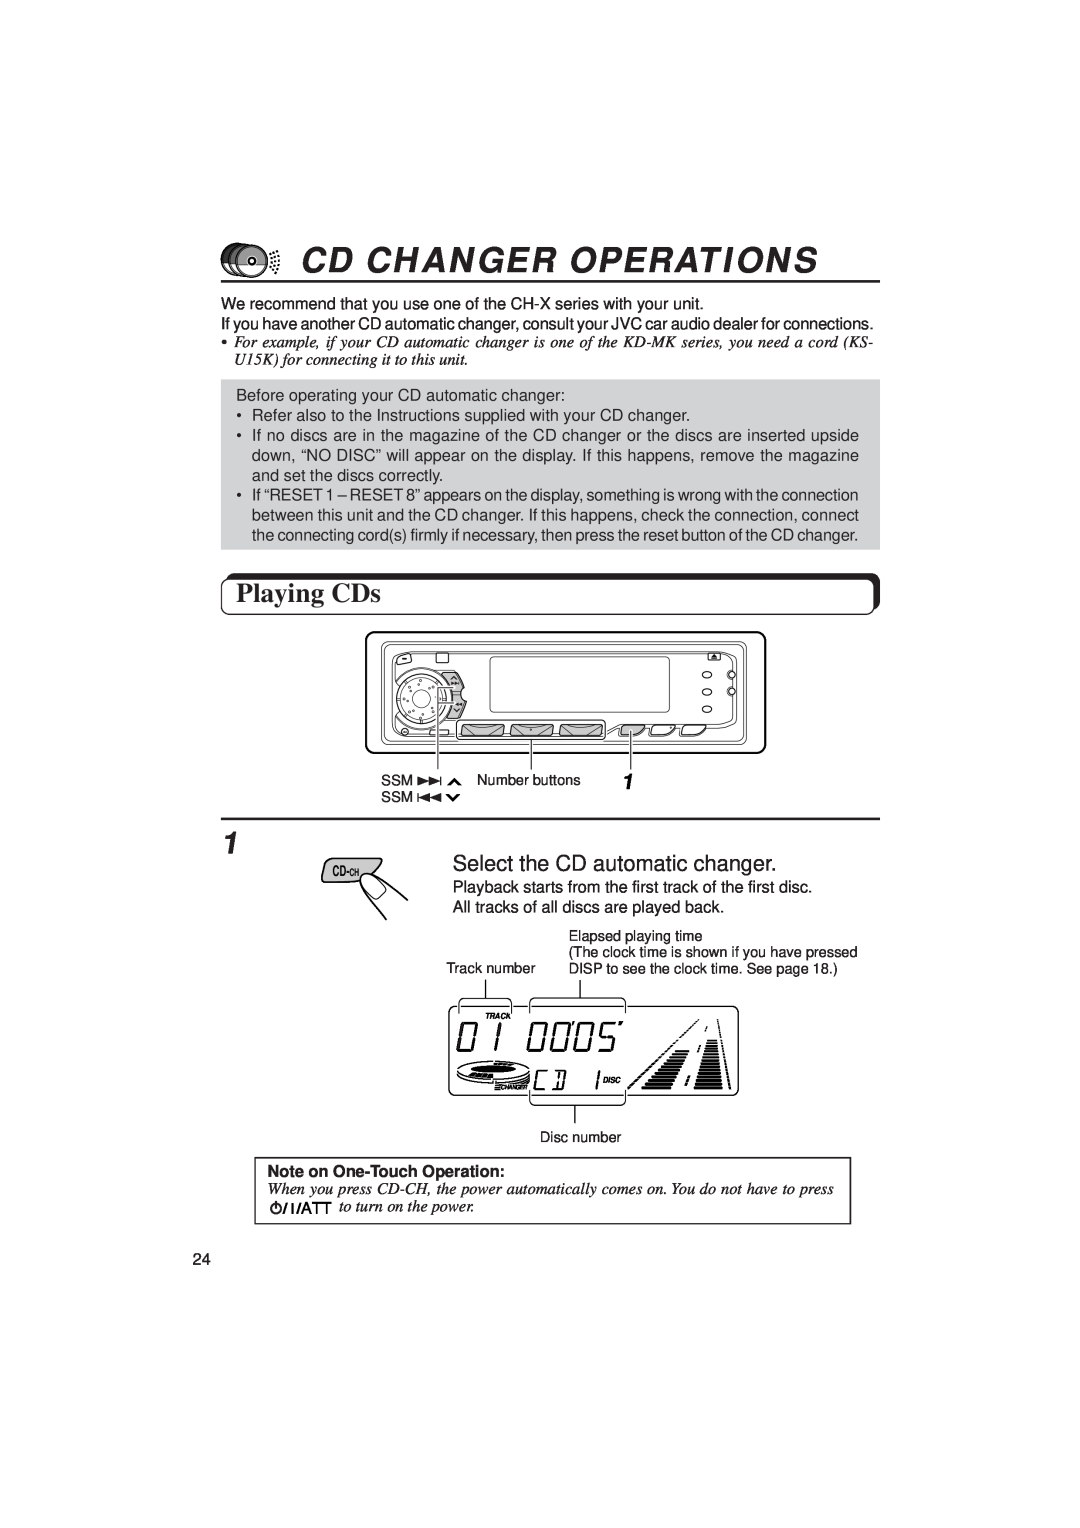 JVC KD-SX939/SX930 manual Cd Changer Operations, Playing CDs, Note on One-TouchOperation 